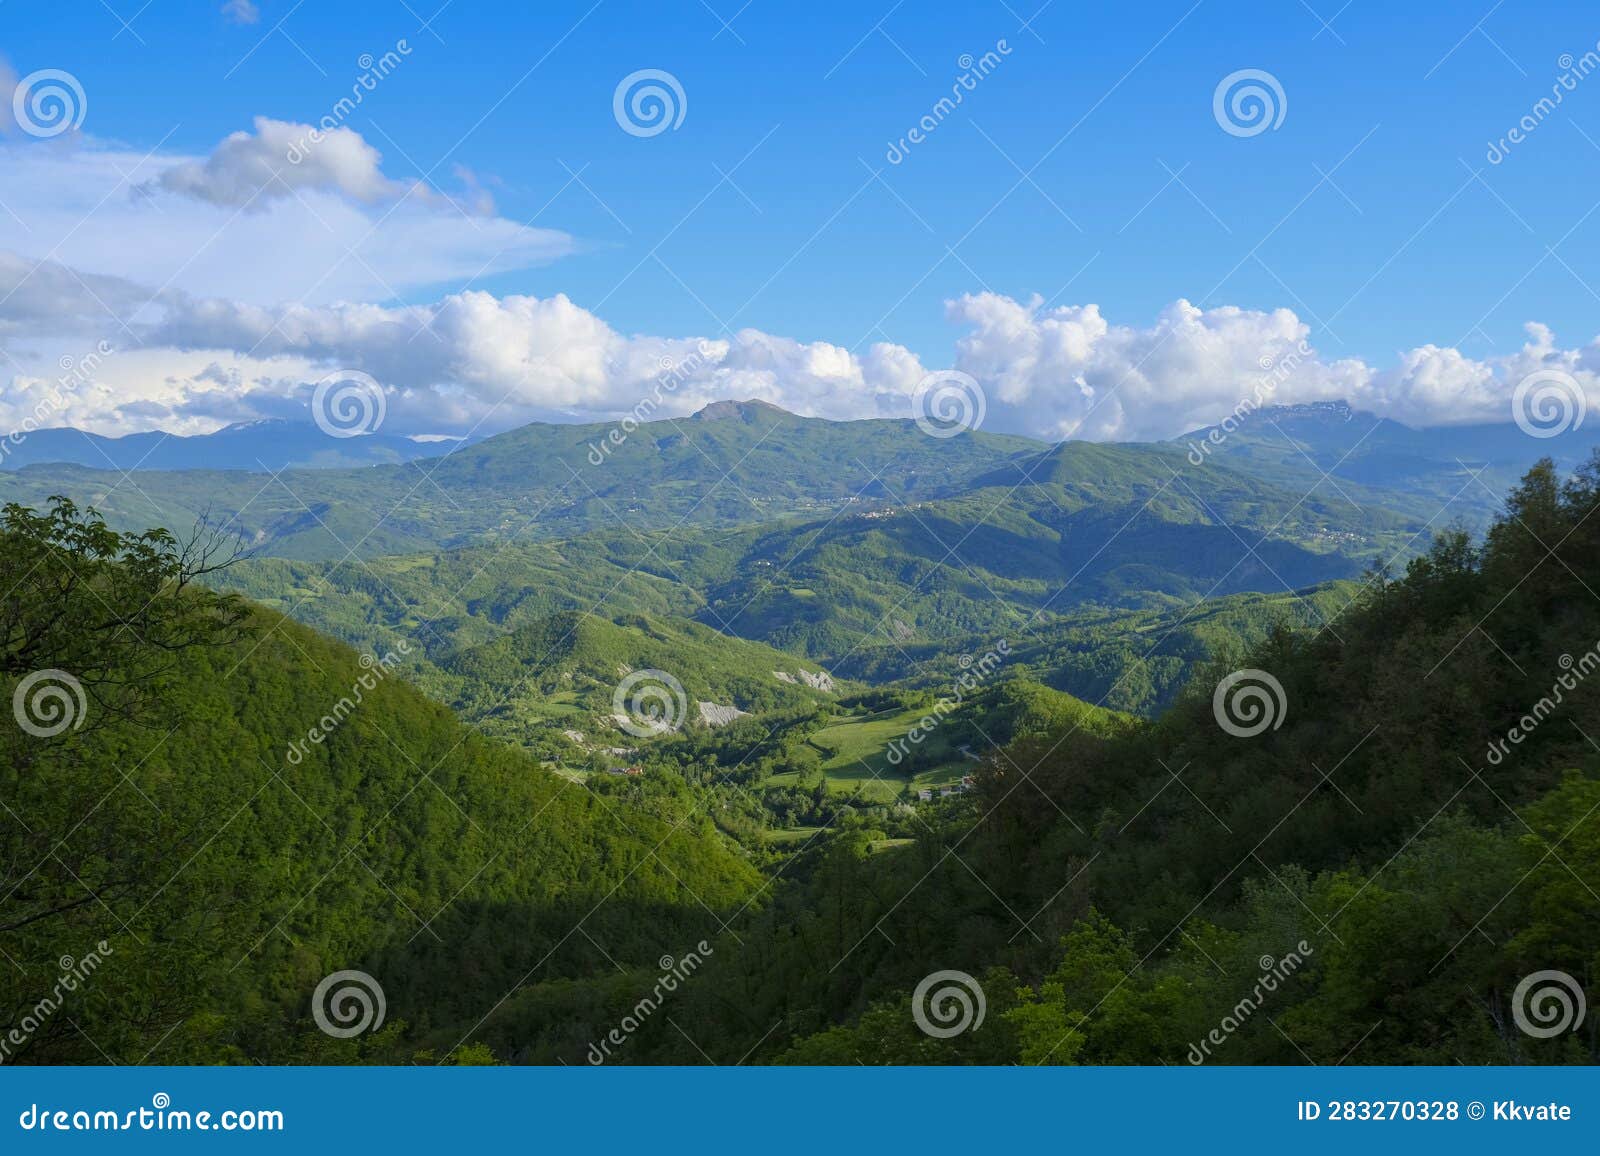 appennies tosco-emiliano national park monte fuso. natural background. travel concept